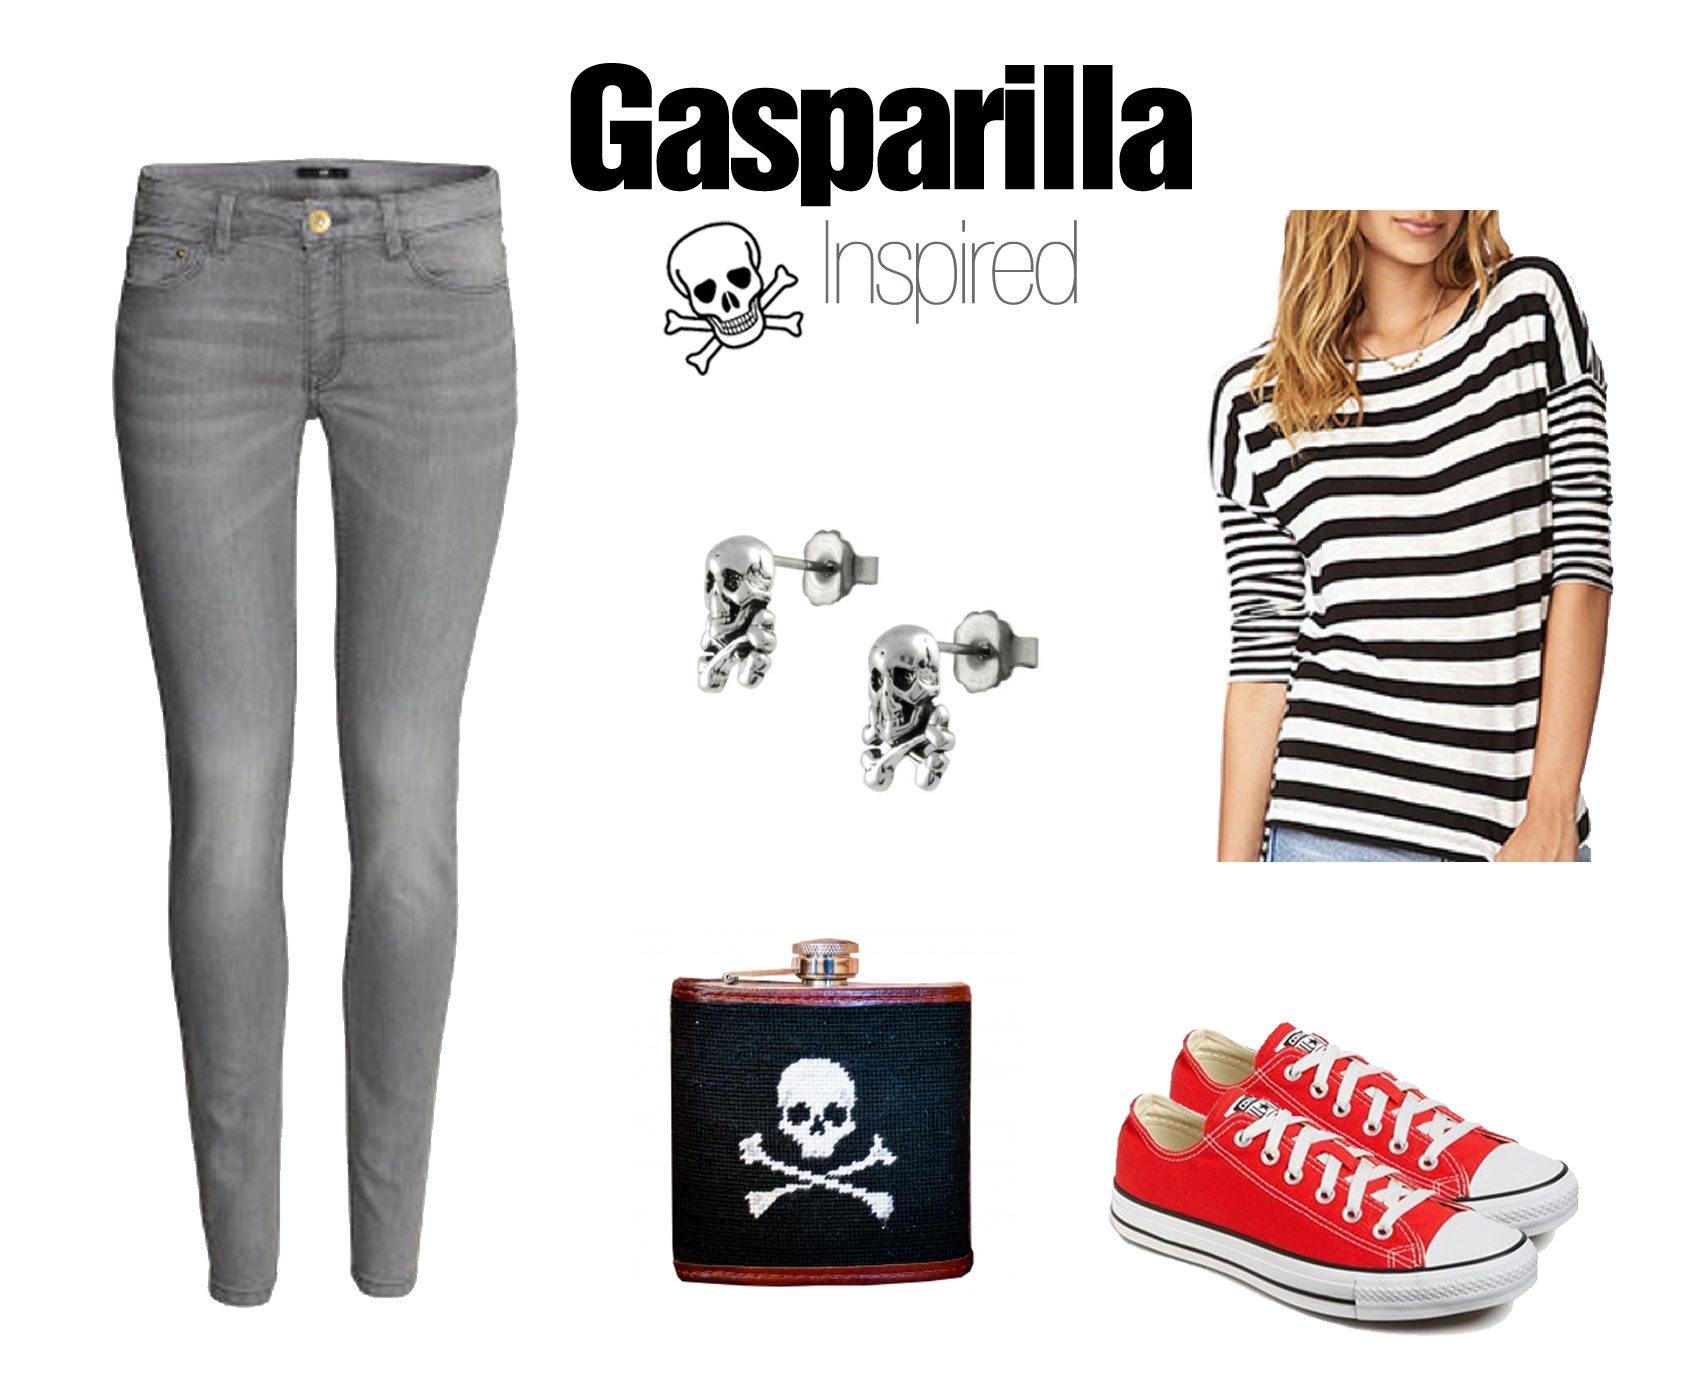 Gasparilla Inspired Outfit